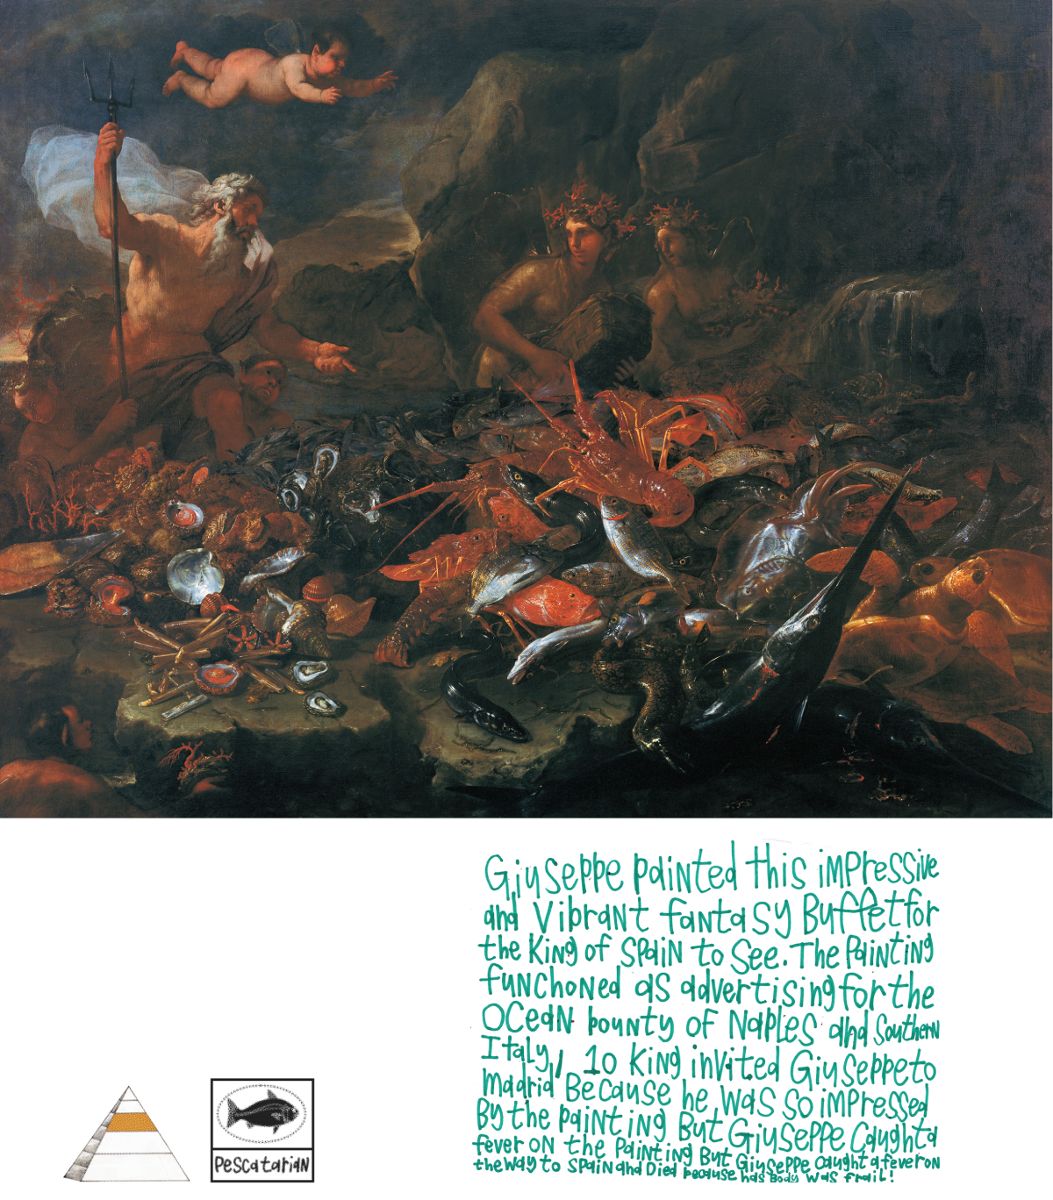 A collage of image and handwritten text. The image is an historical painting featuring a bounty of exotic seafood and mythological figures. The text below describes an historical account of the painting.